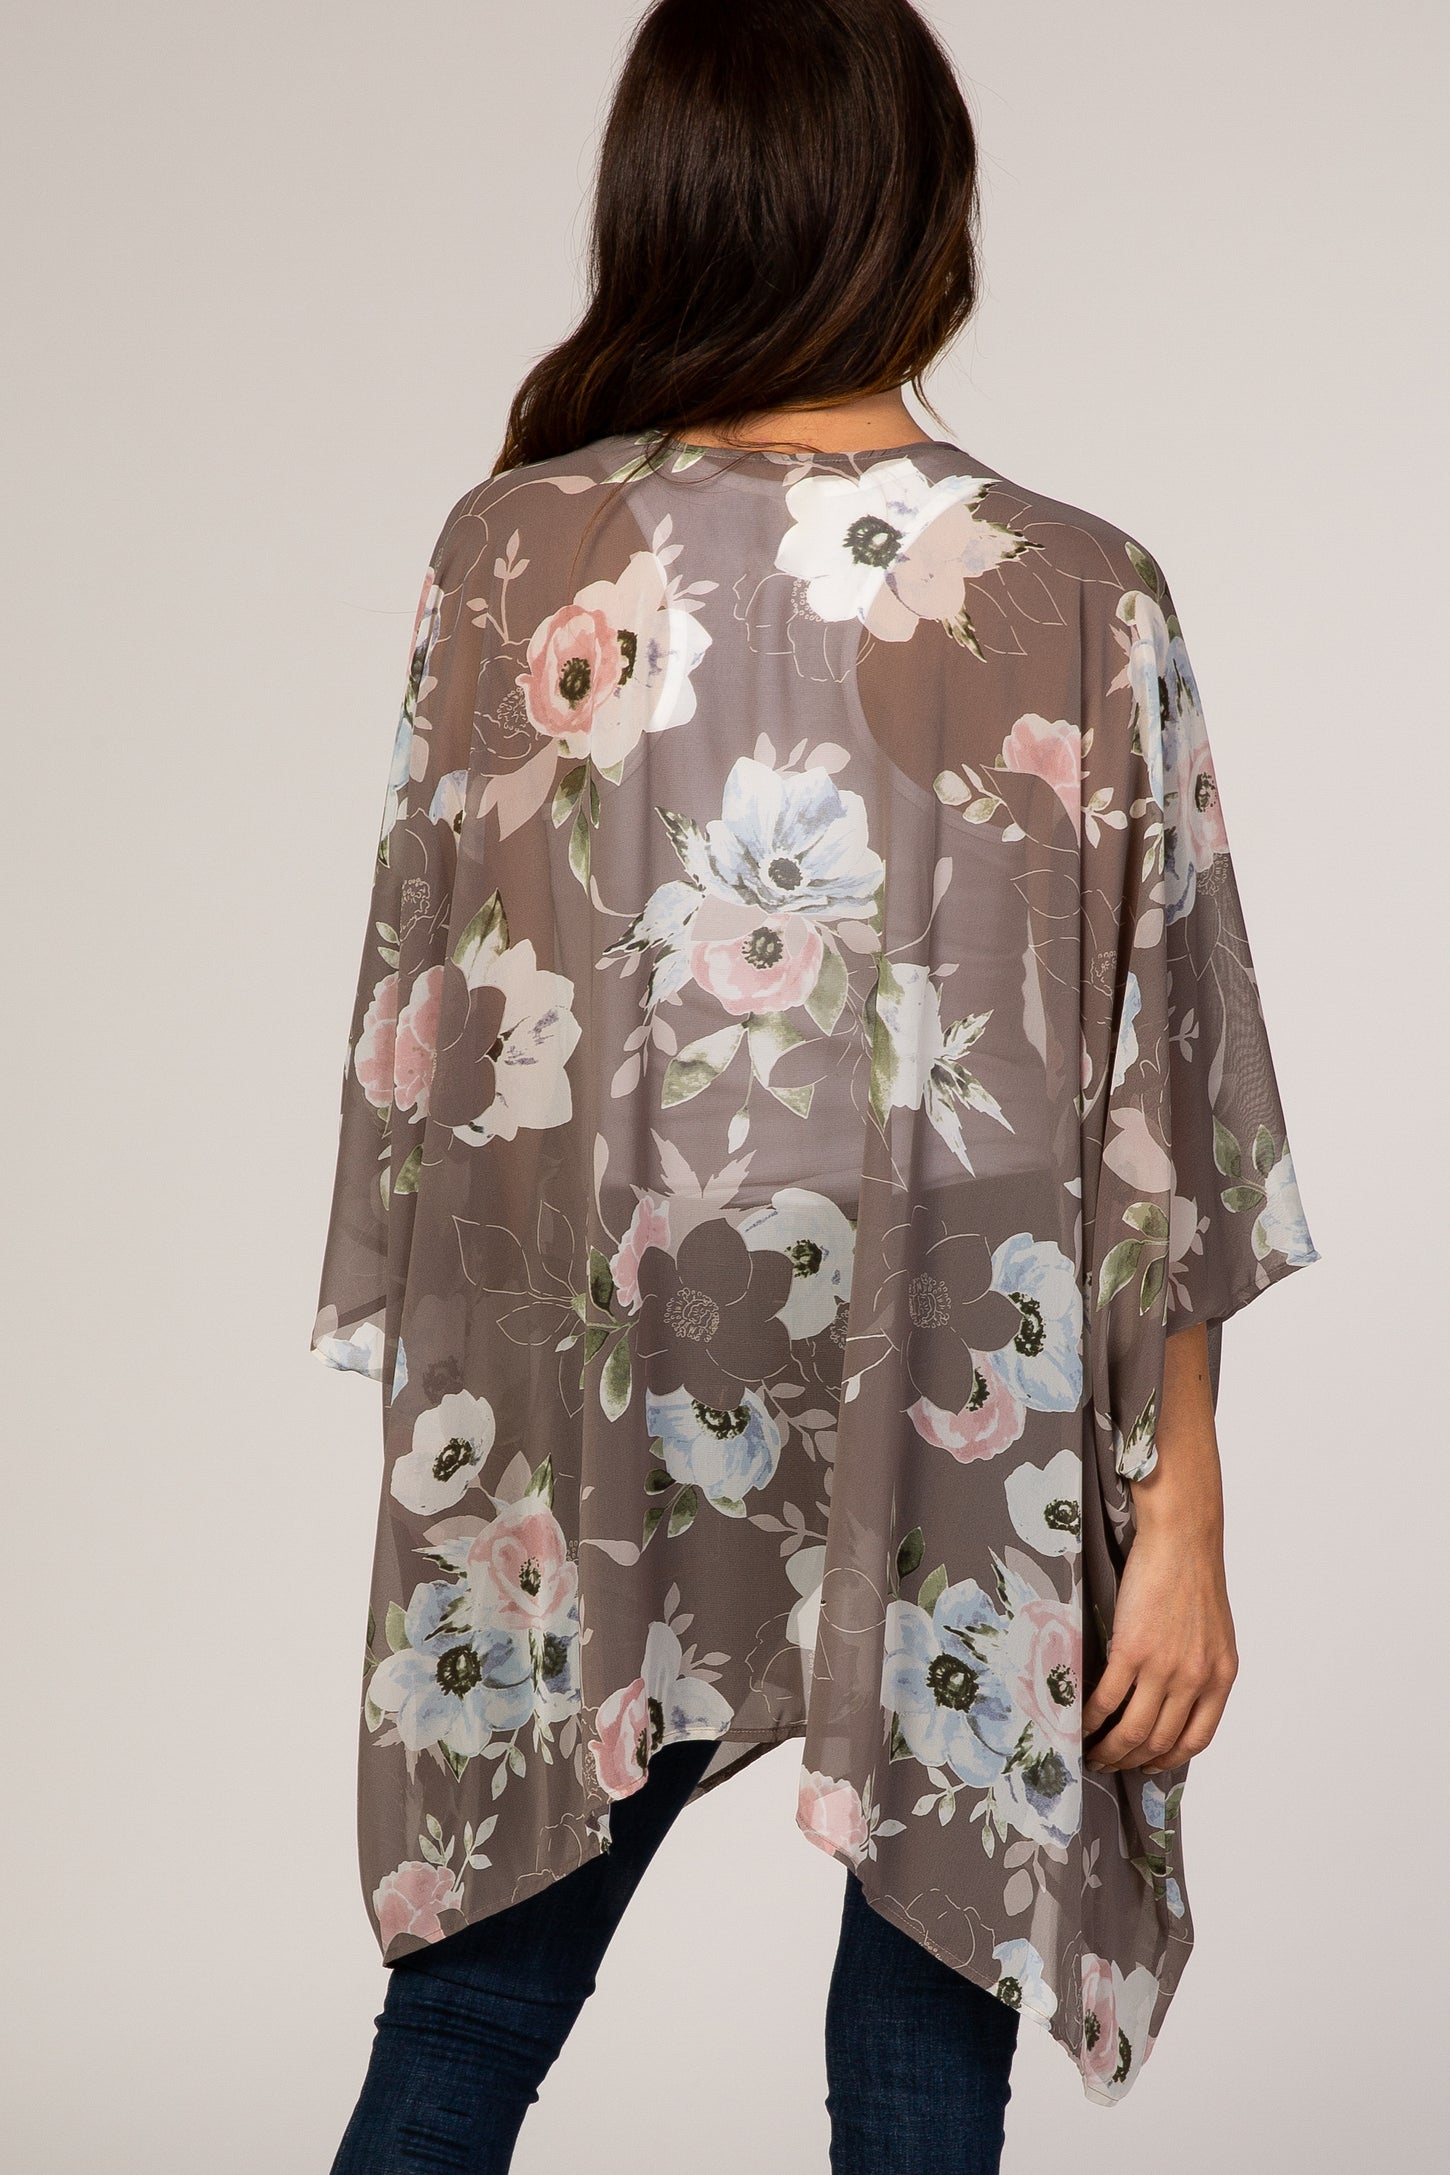 Grey Floral Sheer Cover Up – PinkBlush